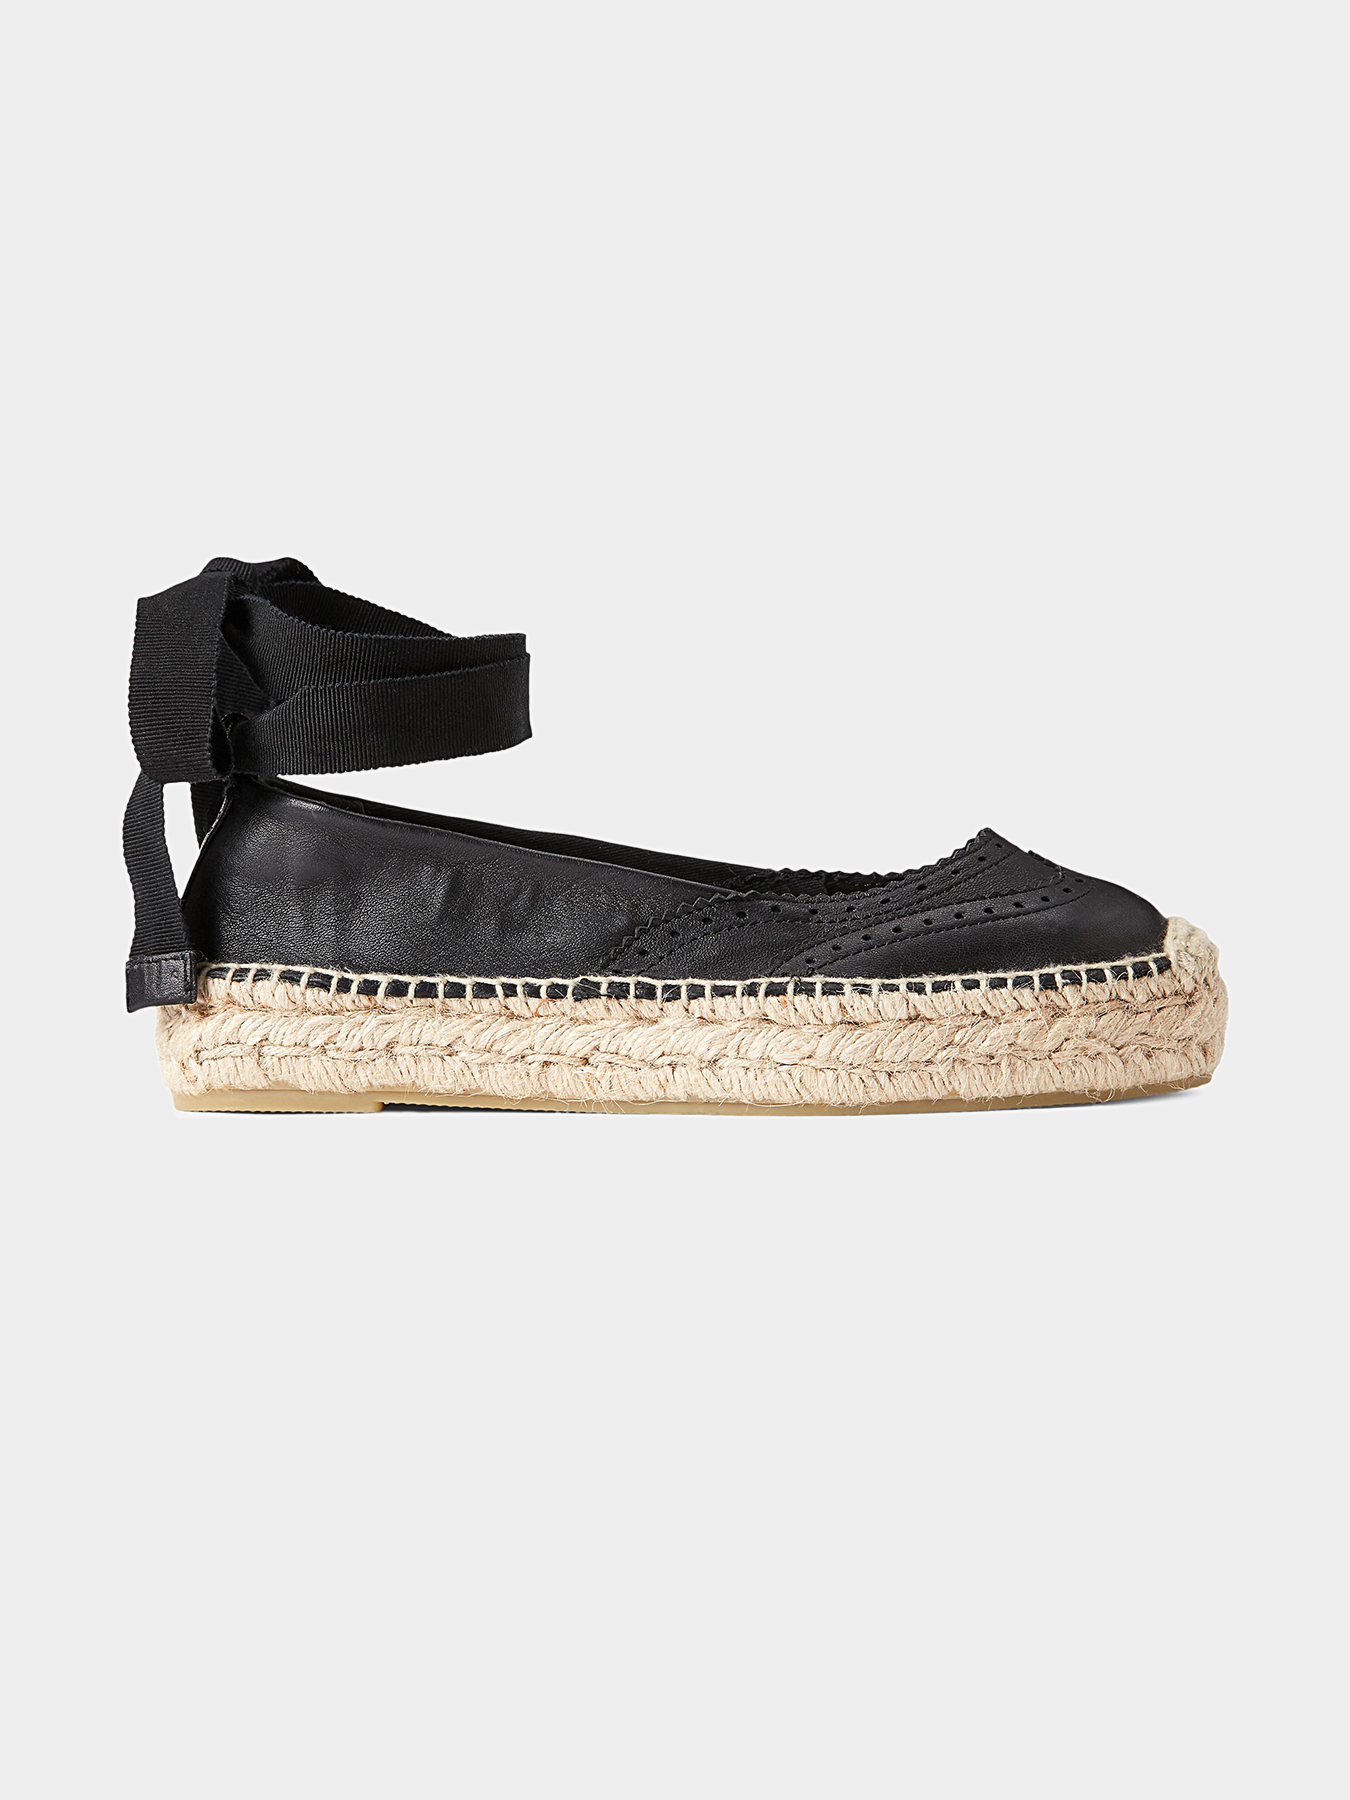 Black leather espadrilles with ankle ties brand POLO RALPH LAUREN —  /en